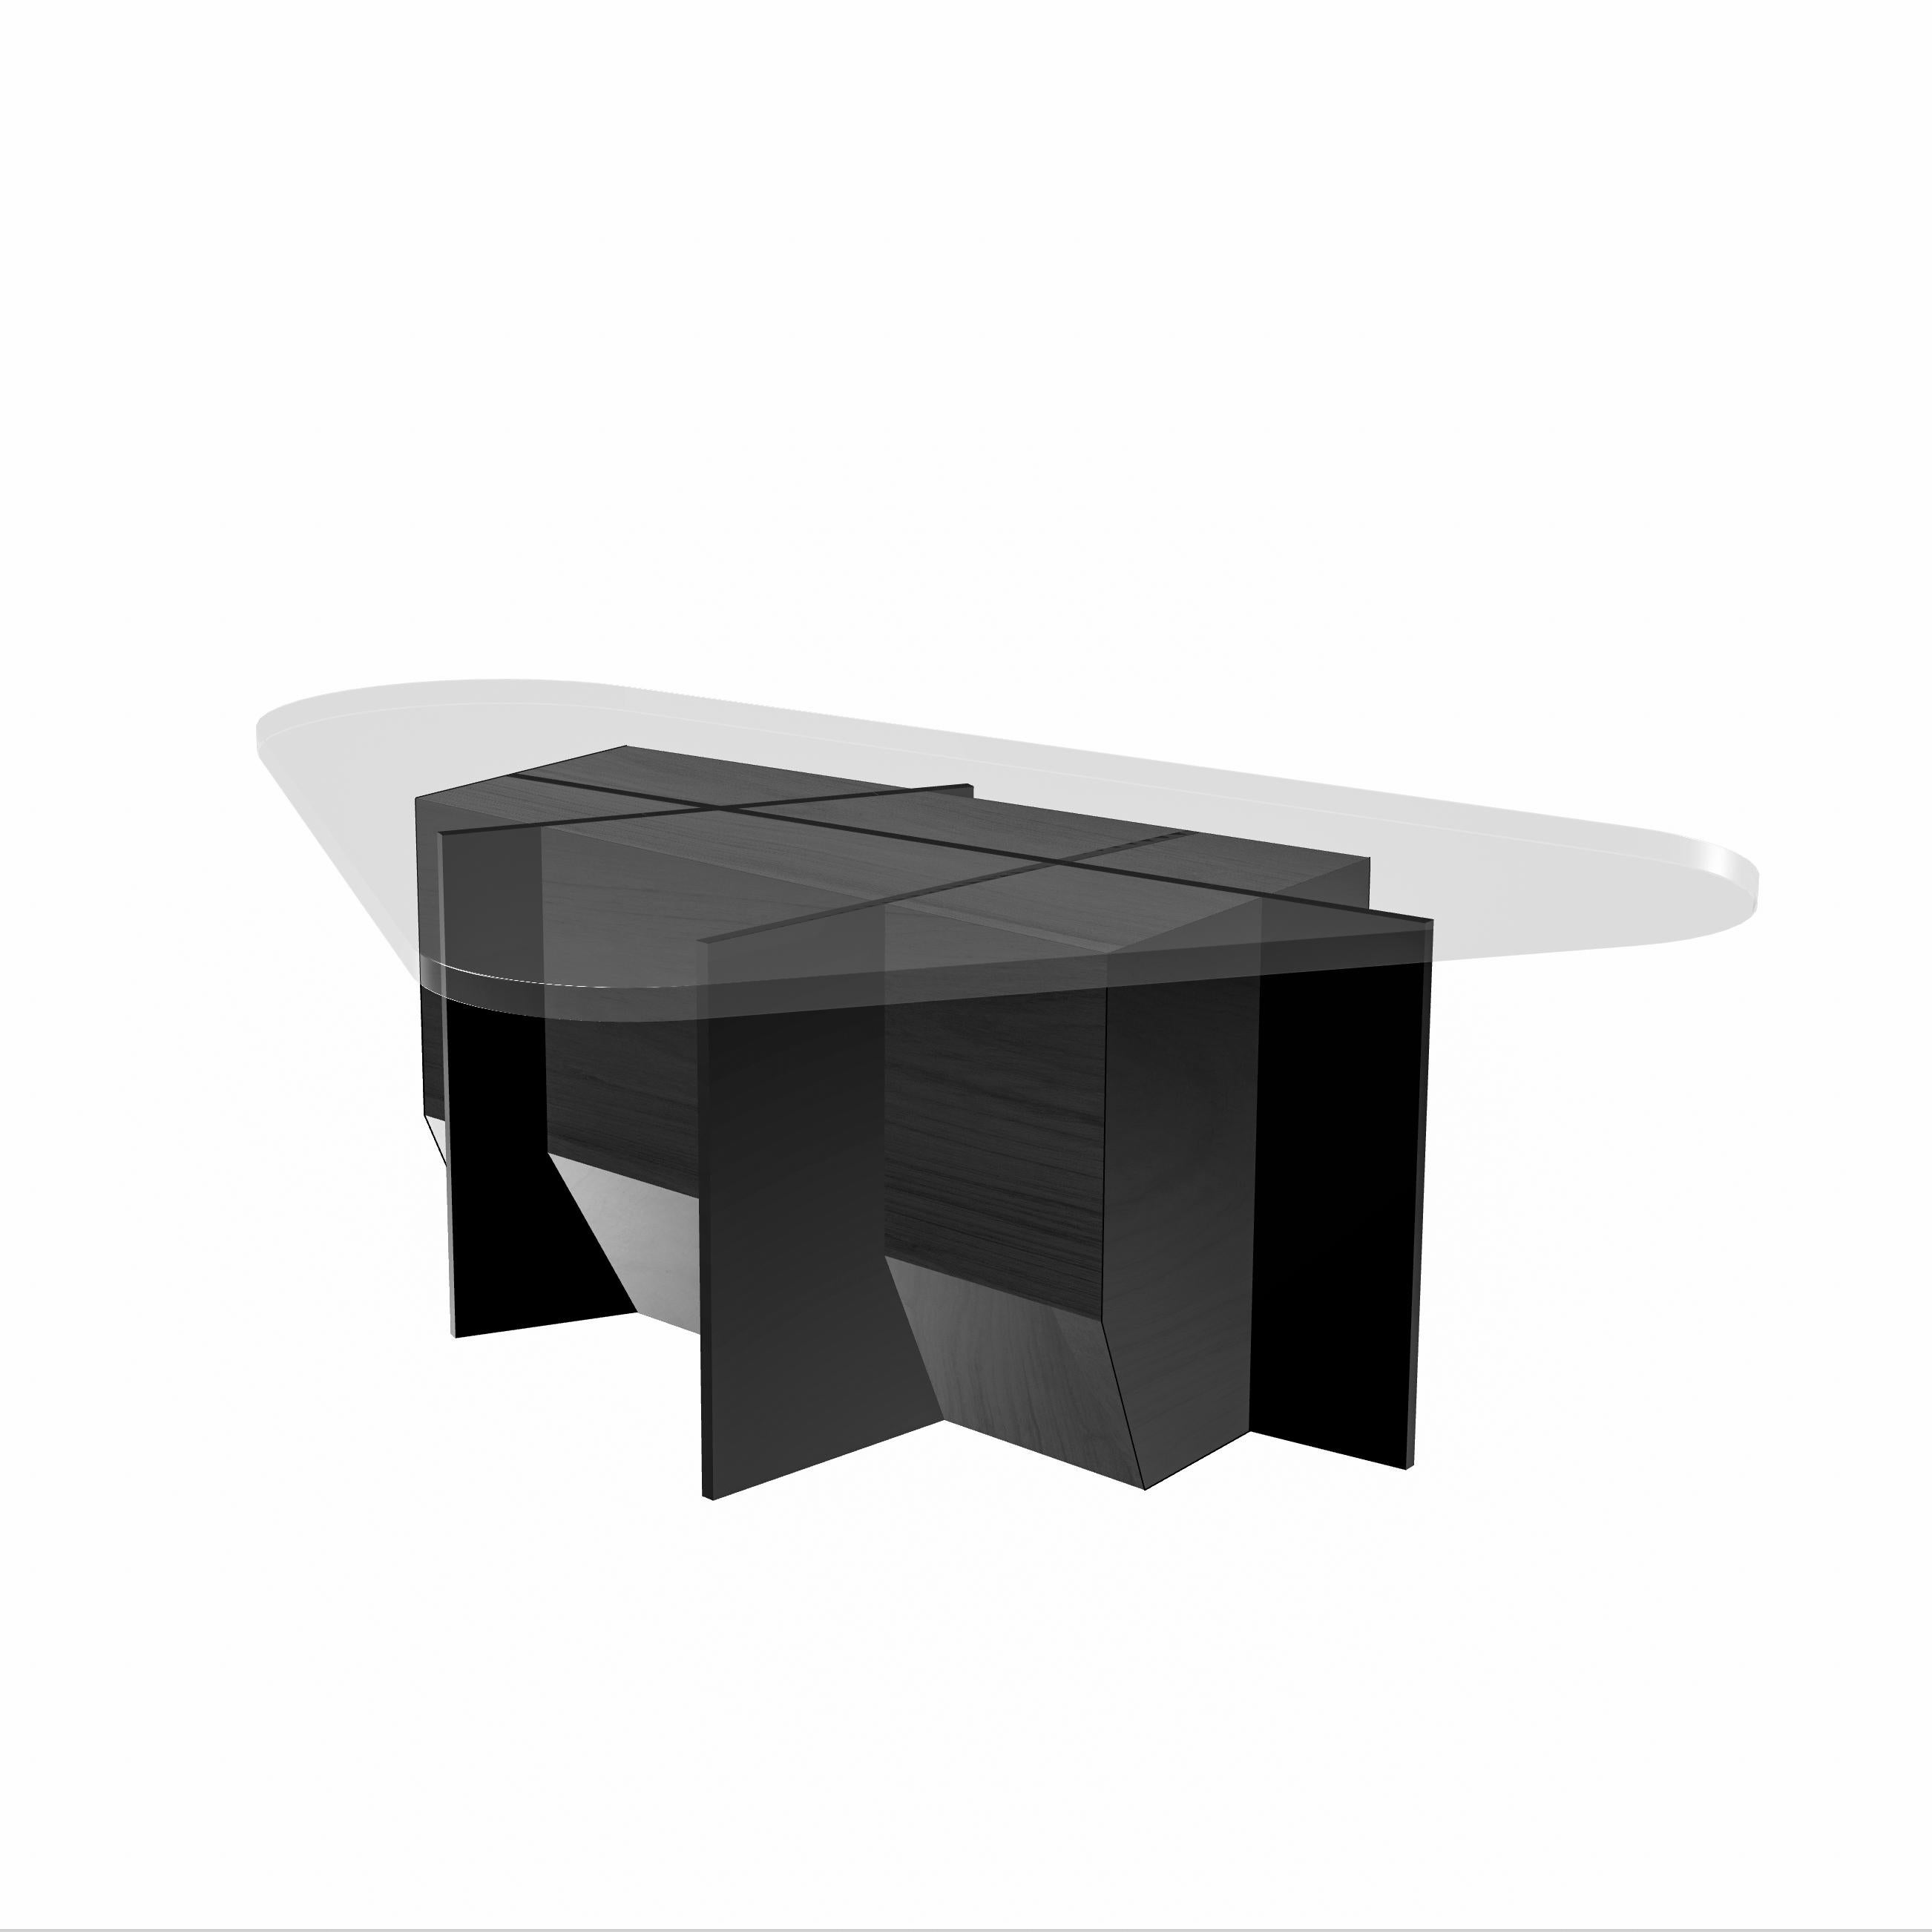 om6 contemporary Coffee Table, Black Oak, Steel and Glass by mjiila For Sale 3